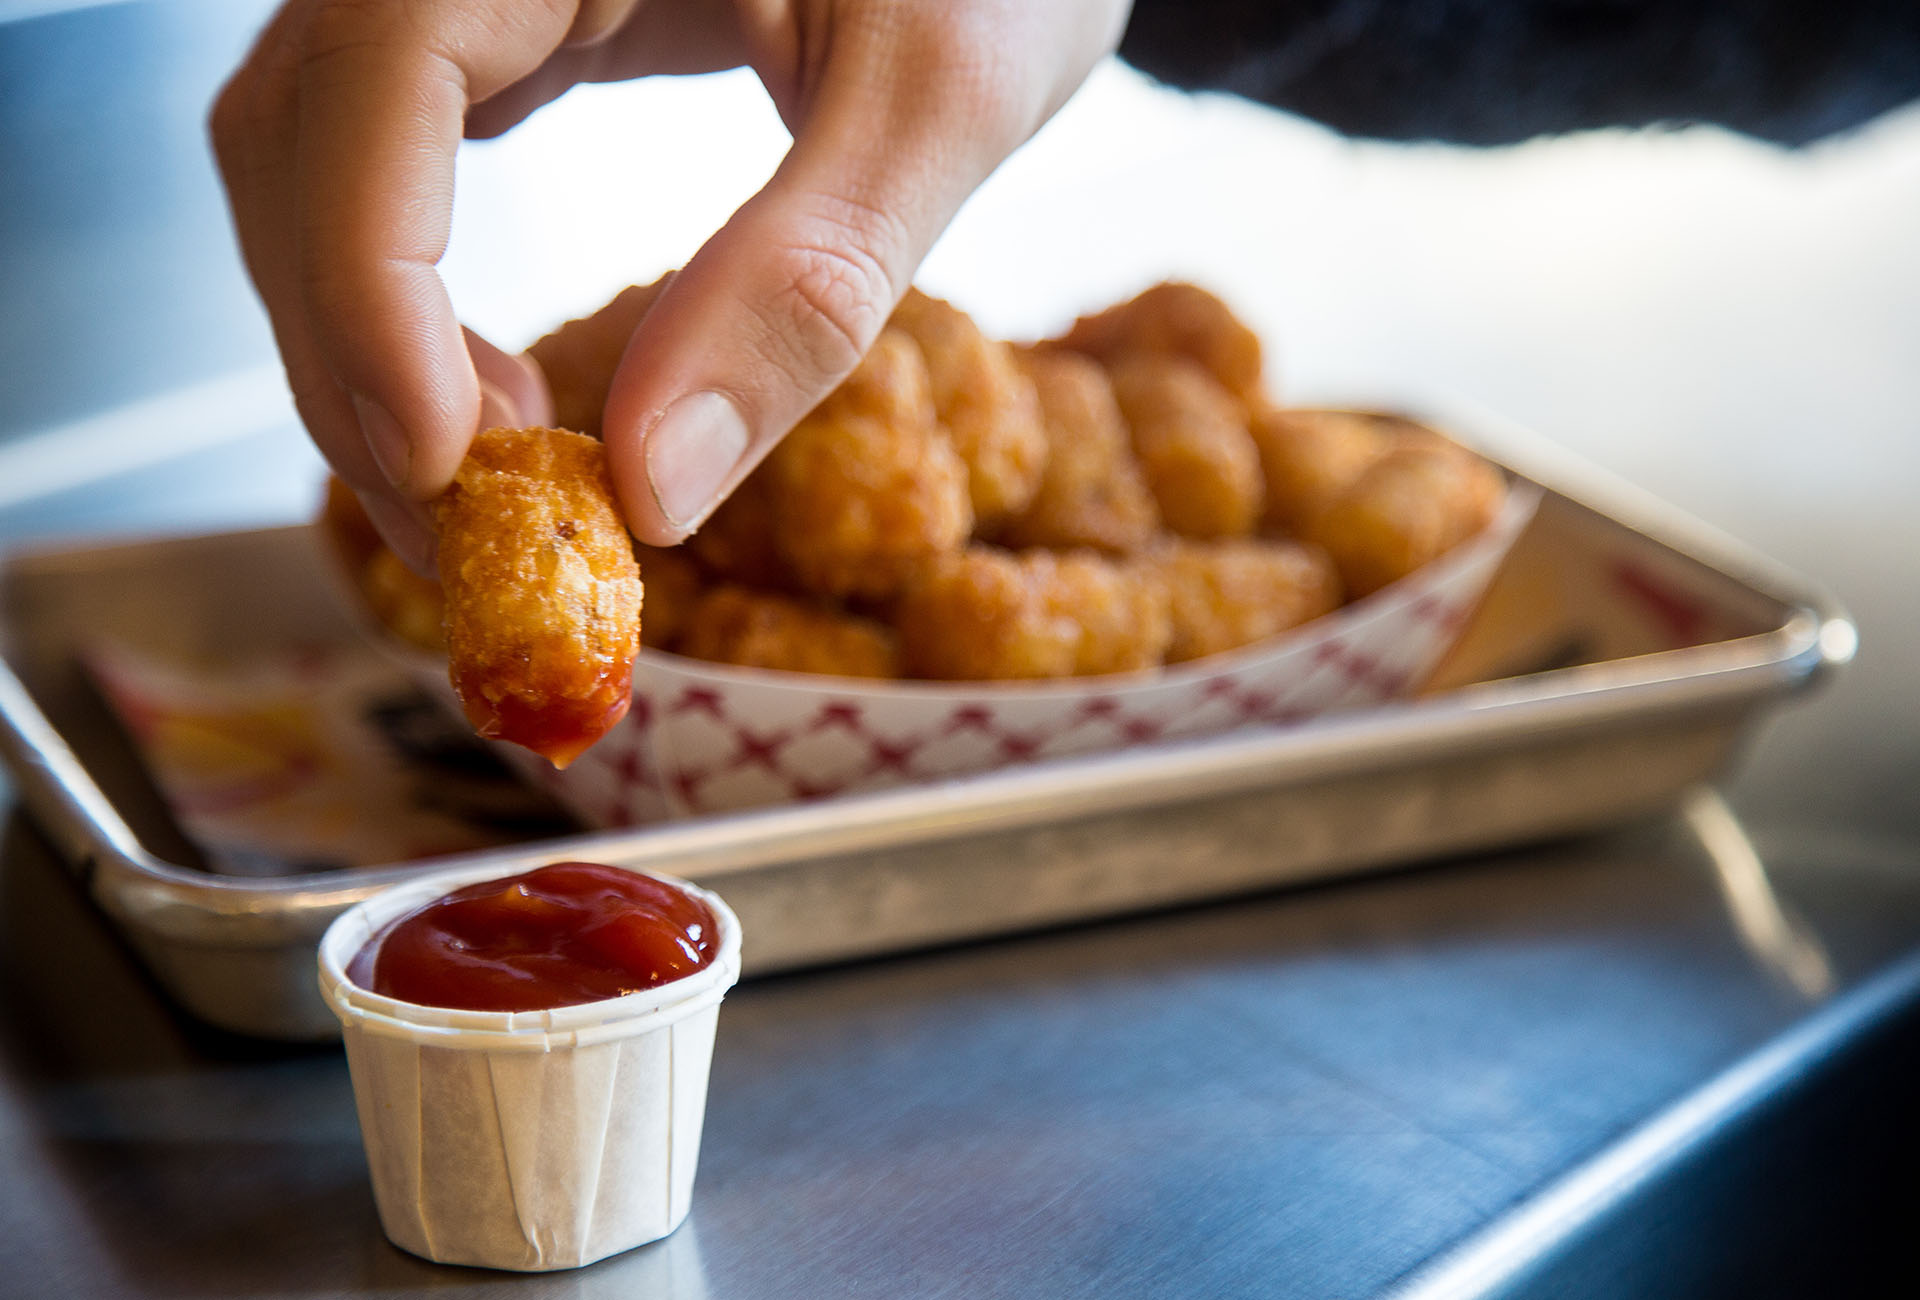 The original Tator Tots with a side of ketchup.